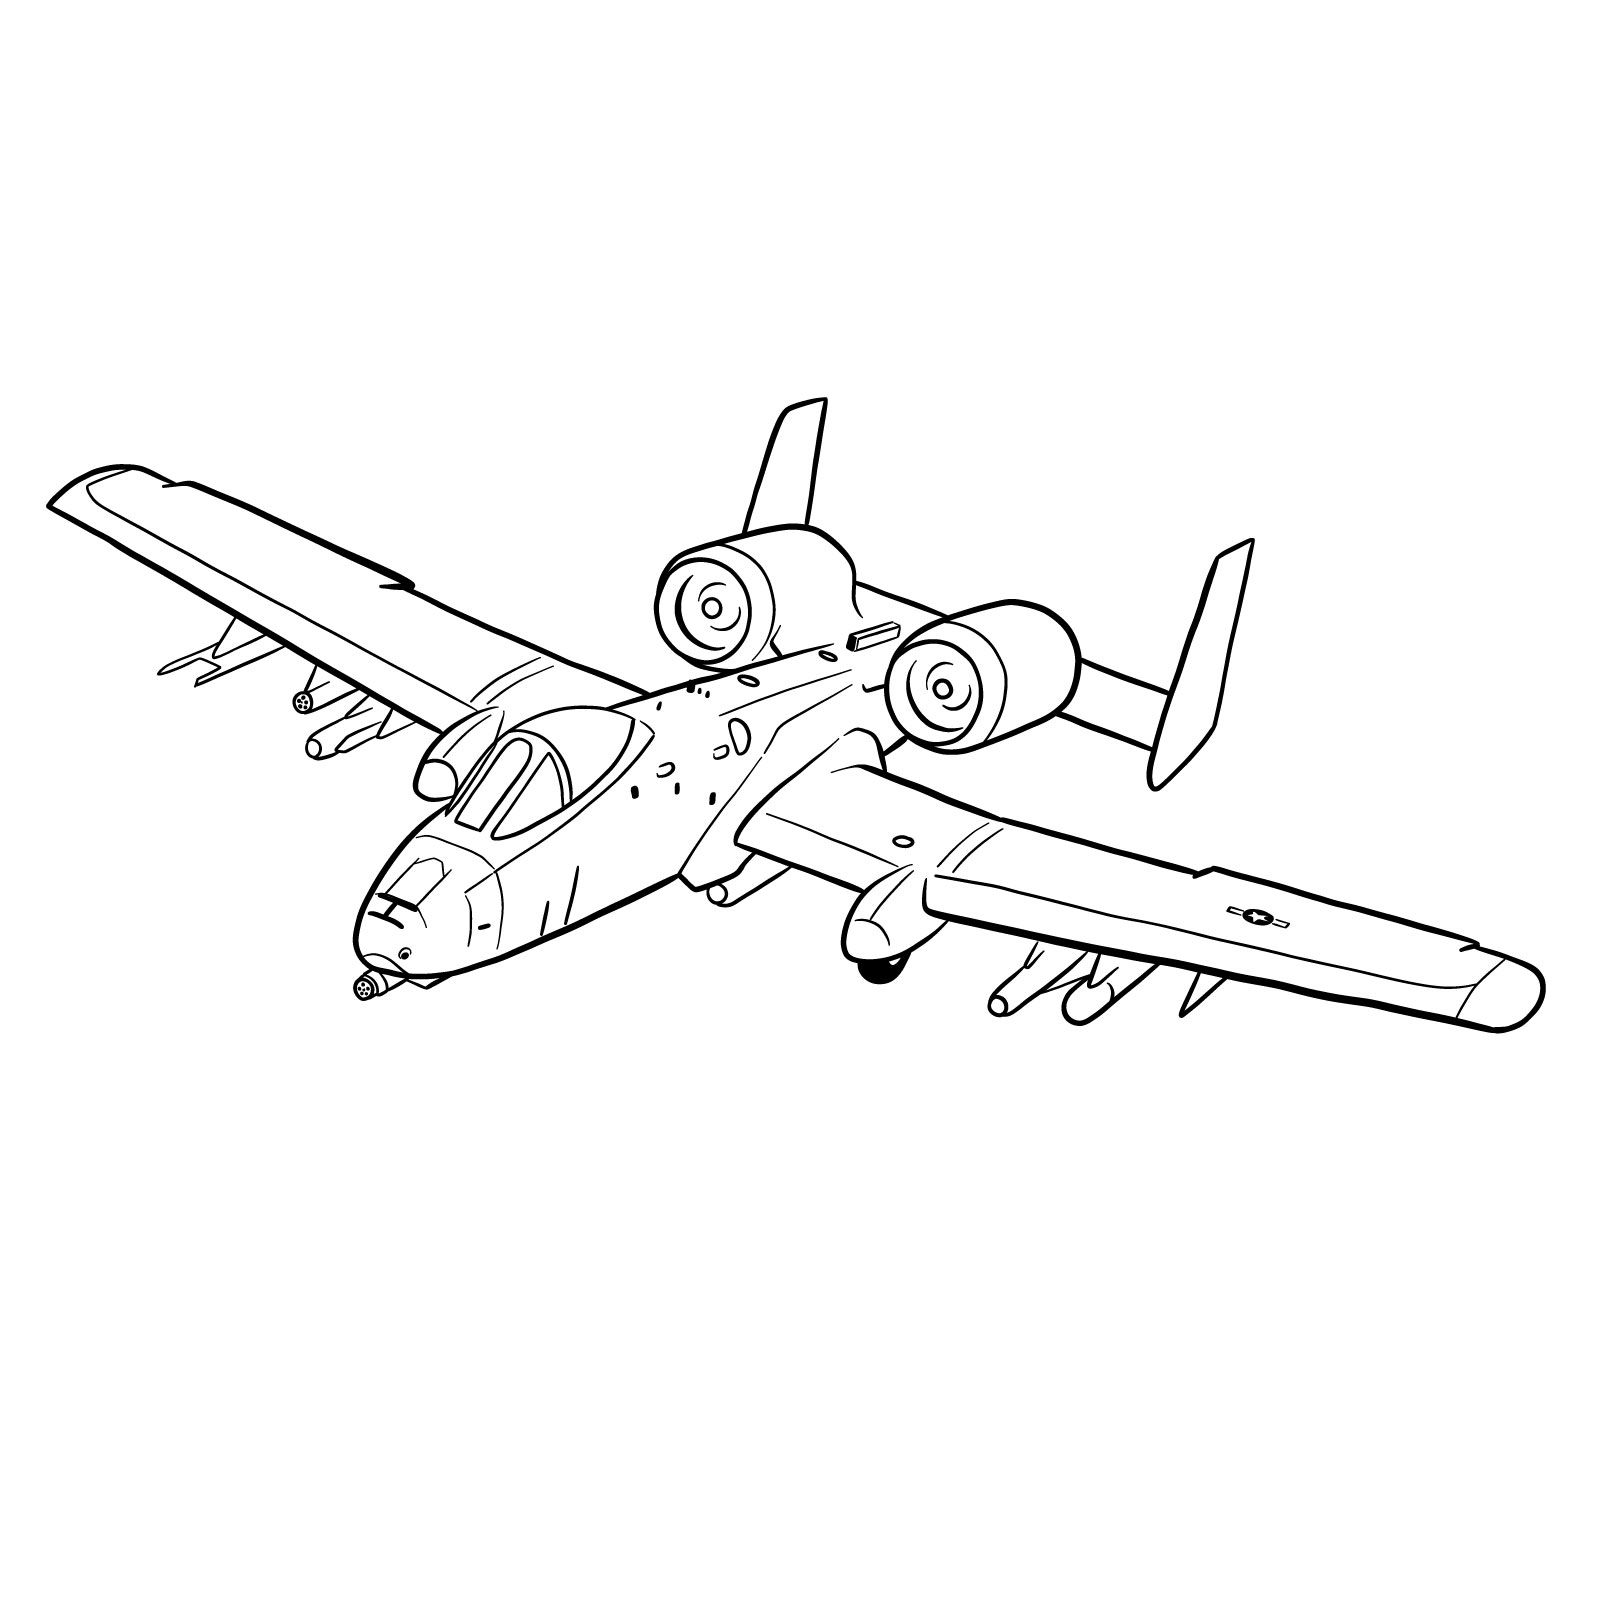 26+ a10 warthog coloring page AnnmarieEira